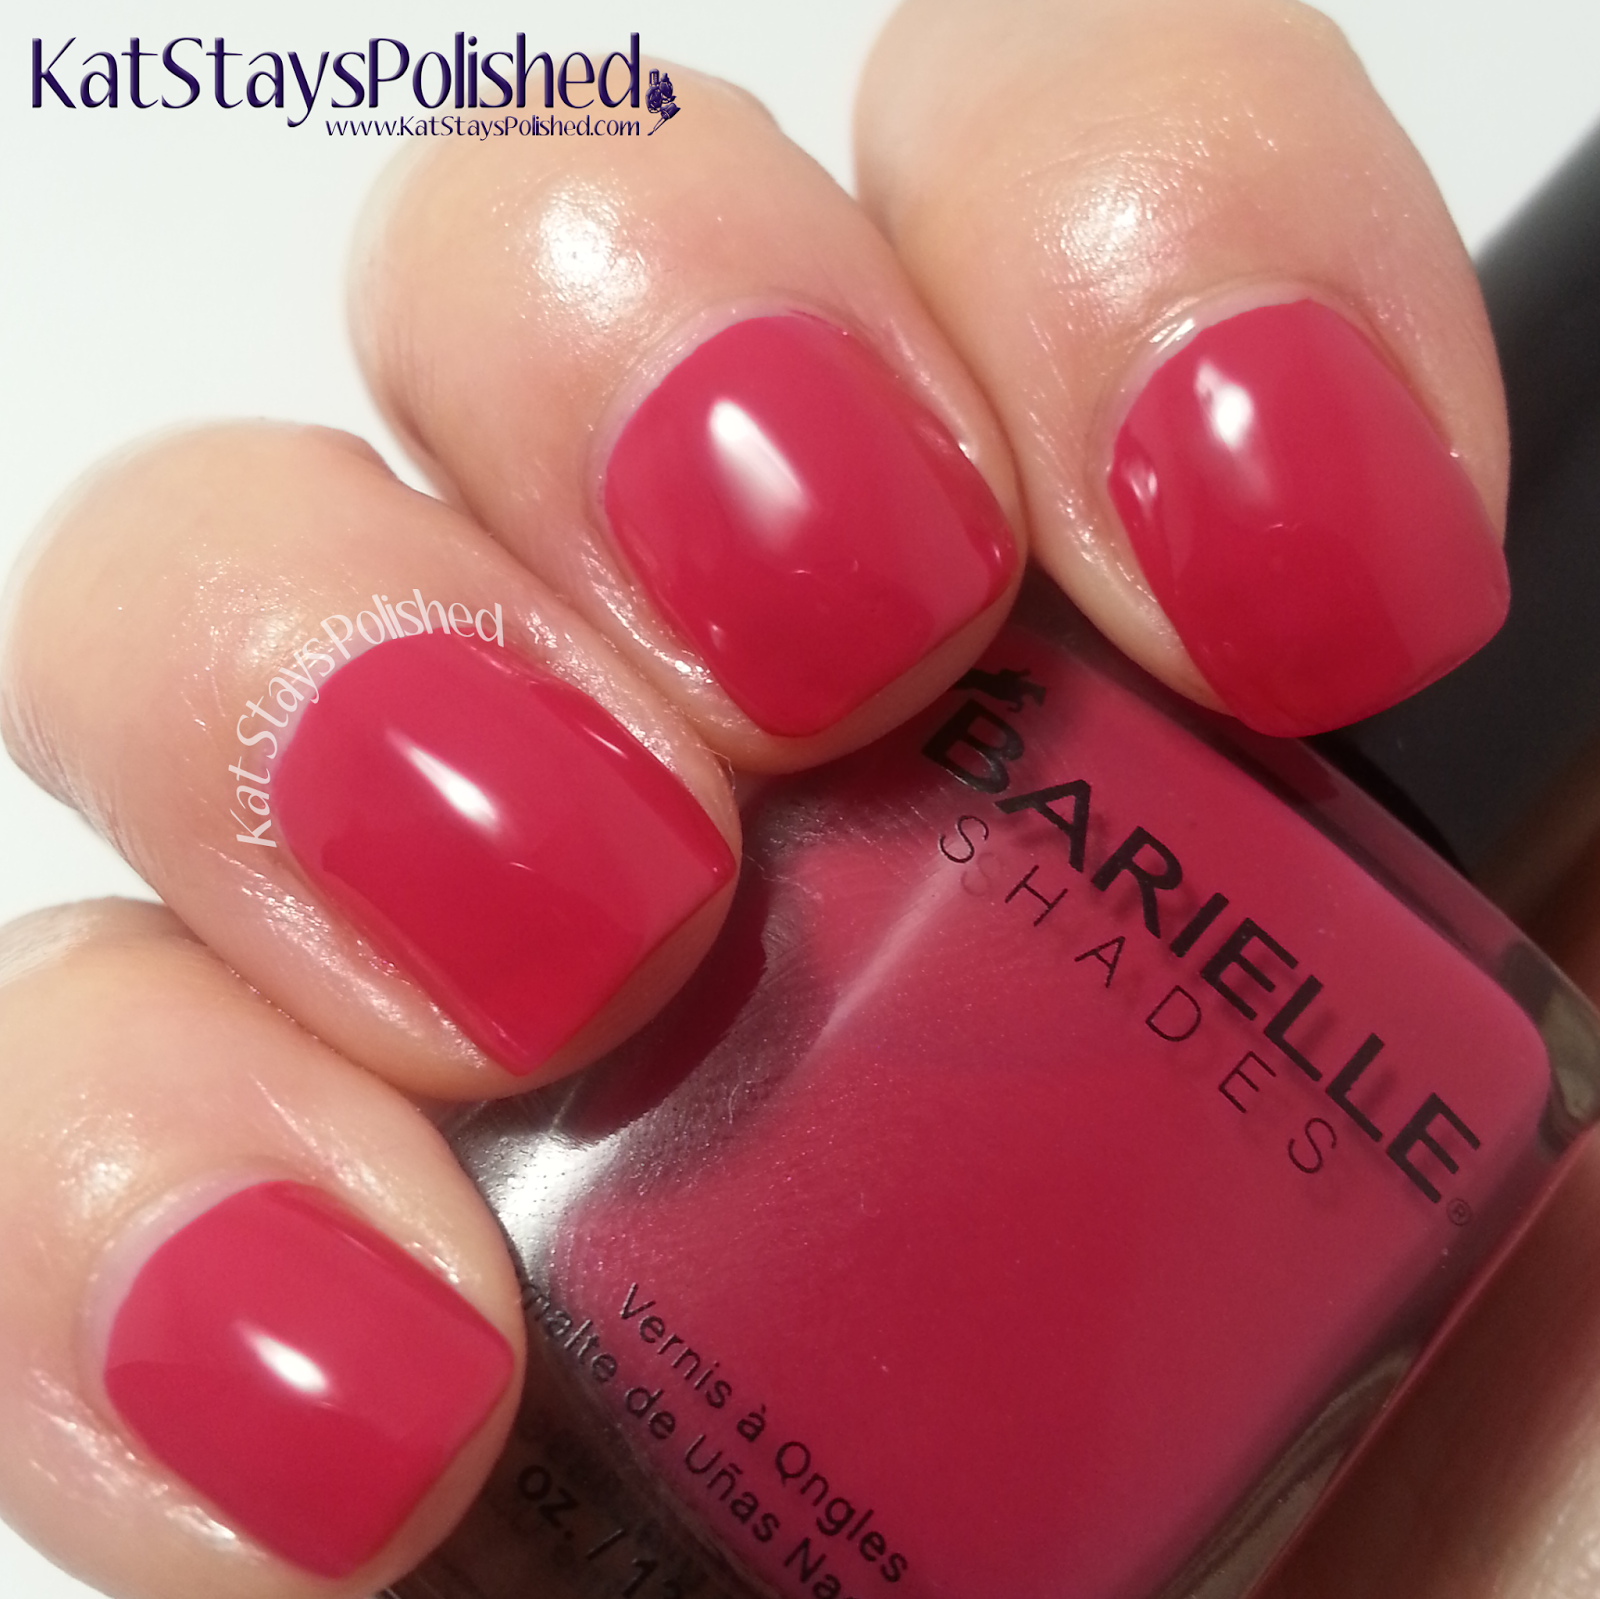 Barielle Keys Collection - Summer 2014 - Paradise in the Tropics | Kat Stays Polished